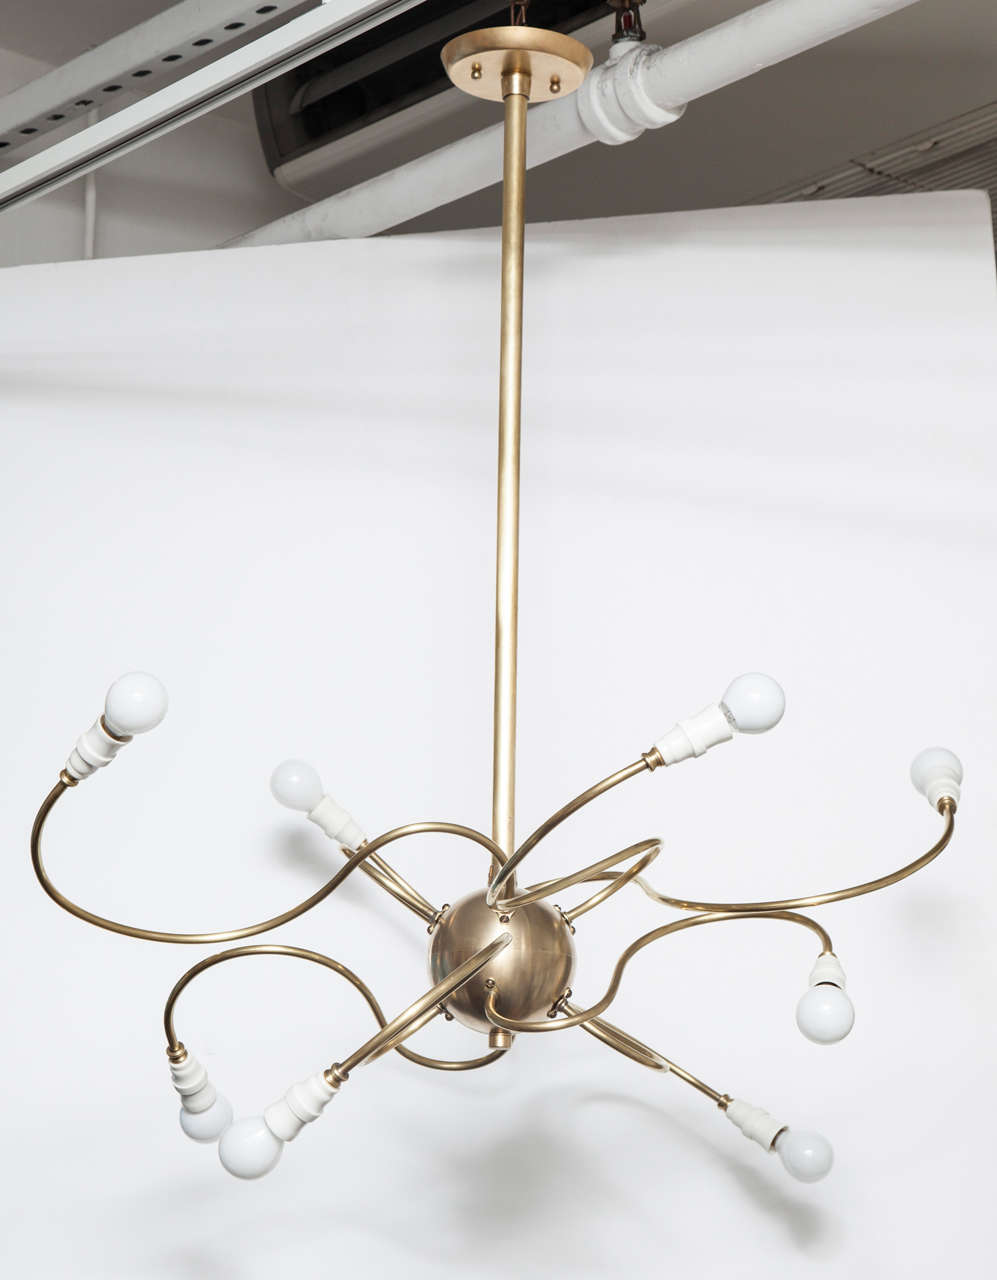 Available in custom sizes.  Made from vintage and new parts, this brass sputnik chandelier features eight (8) spider-style free-form arms.Includes  hanging stem and canopy. Takes eight (8) candelabra base bulbs, 60 watts max.

Dimensions as show;